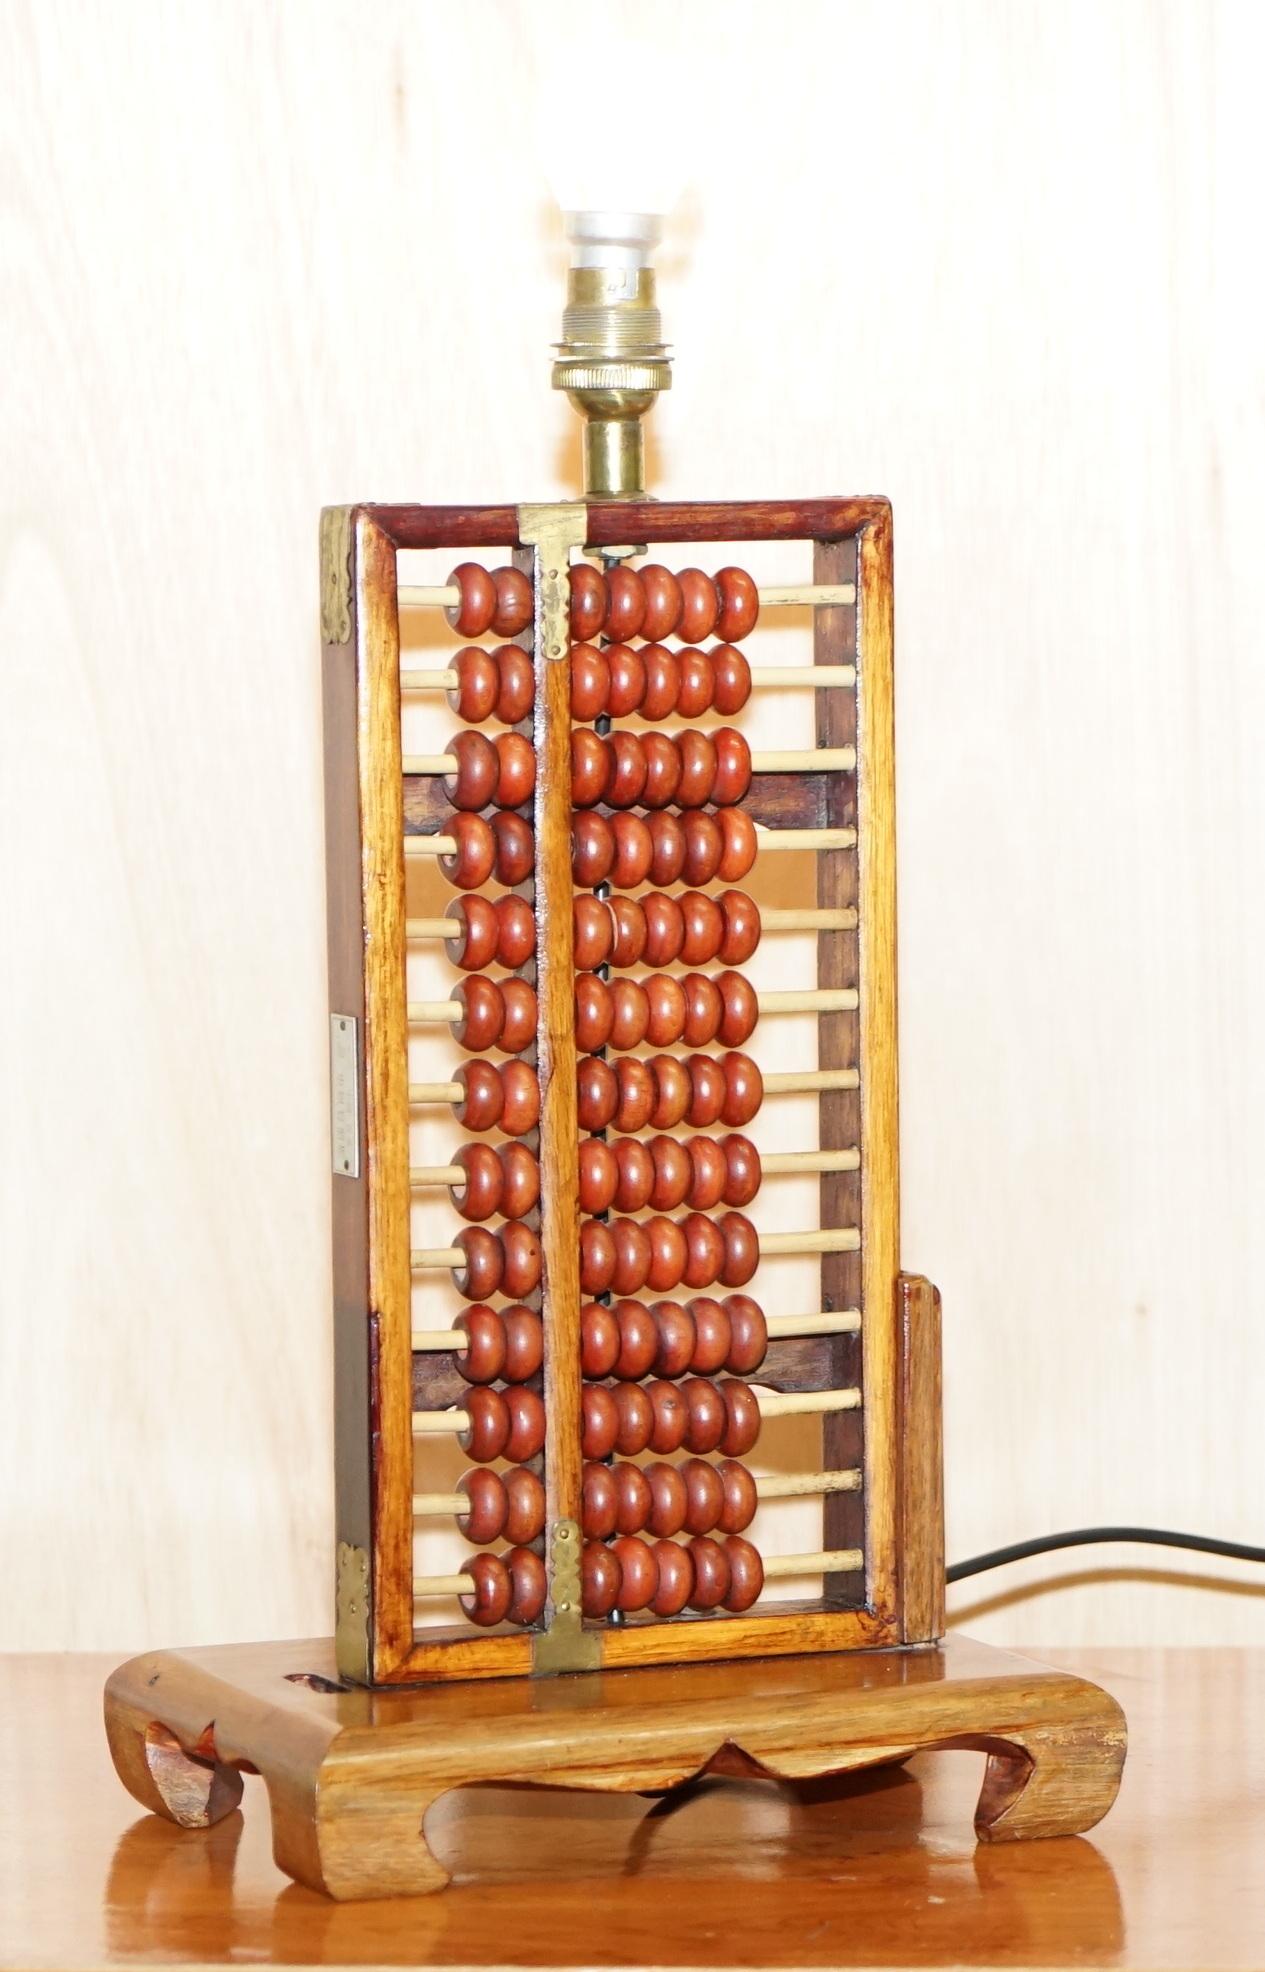 We are delighted to offer for sale this absolutely stunning vintage Mid-Century Modern Chinese abacus rosewood table lamp

A good looking and decorative piece which has been fully rewired with three core cable and plug

These lamps are rare and